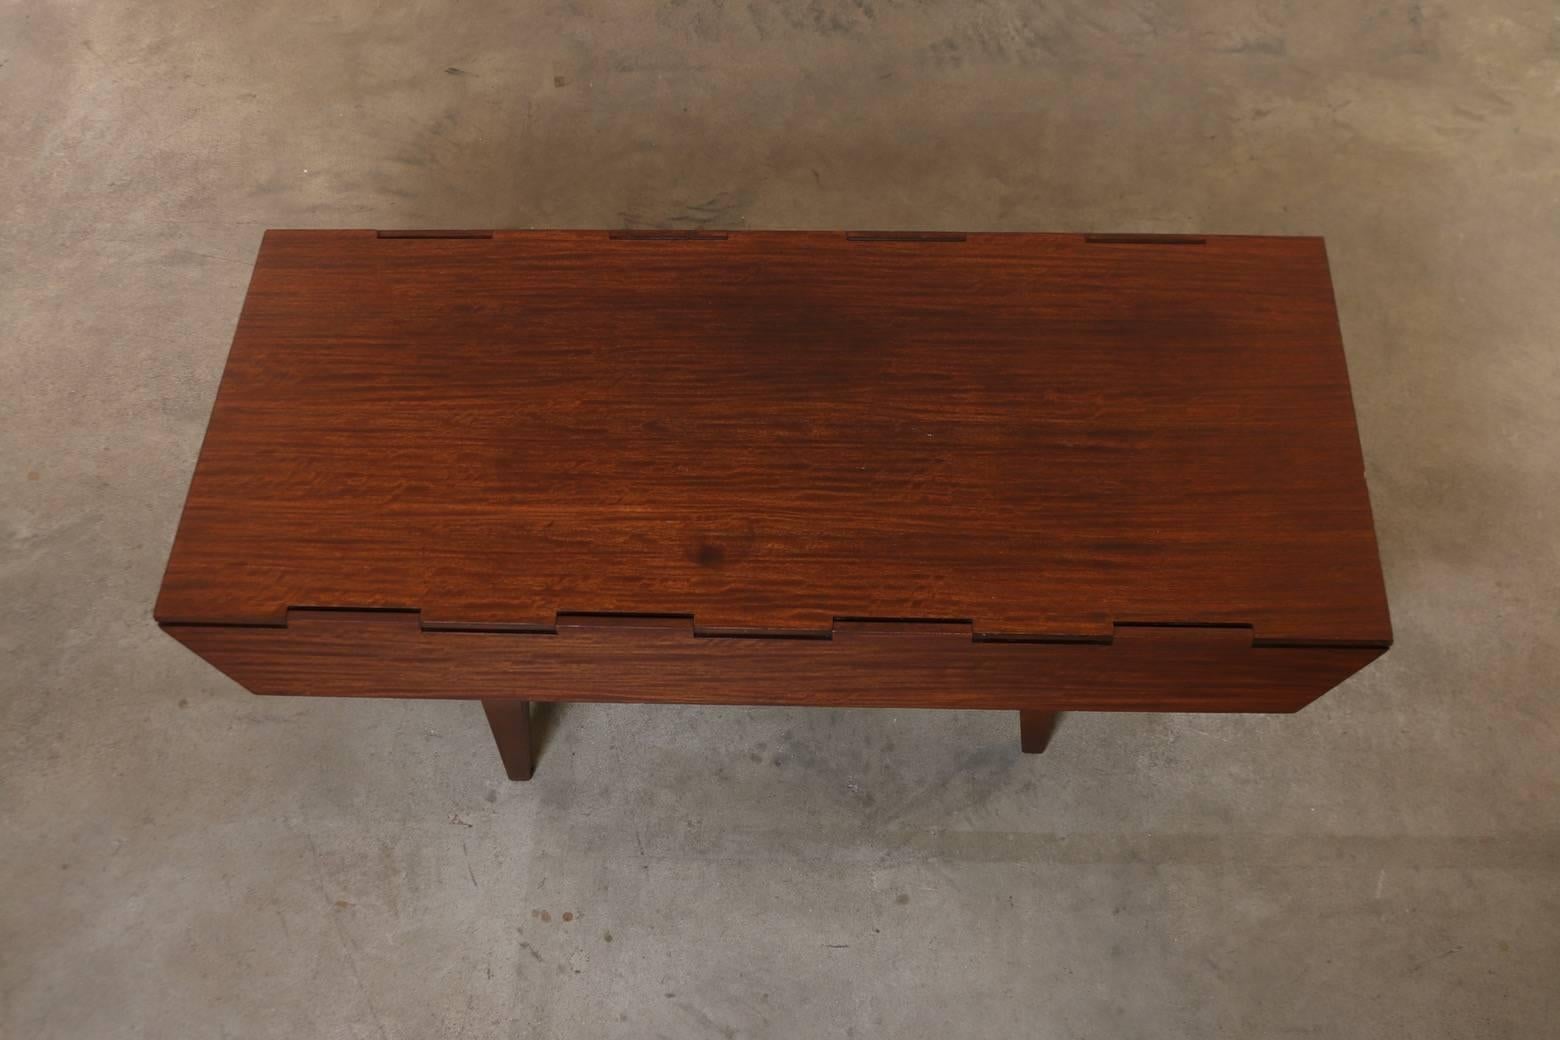 Wood Milo Baughman for Drexel Perspective Convertible Dining Table Coffee Table 1950s